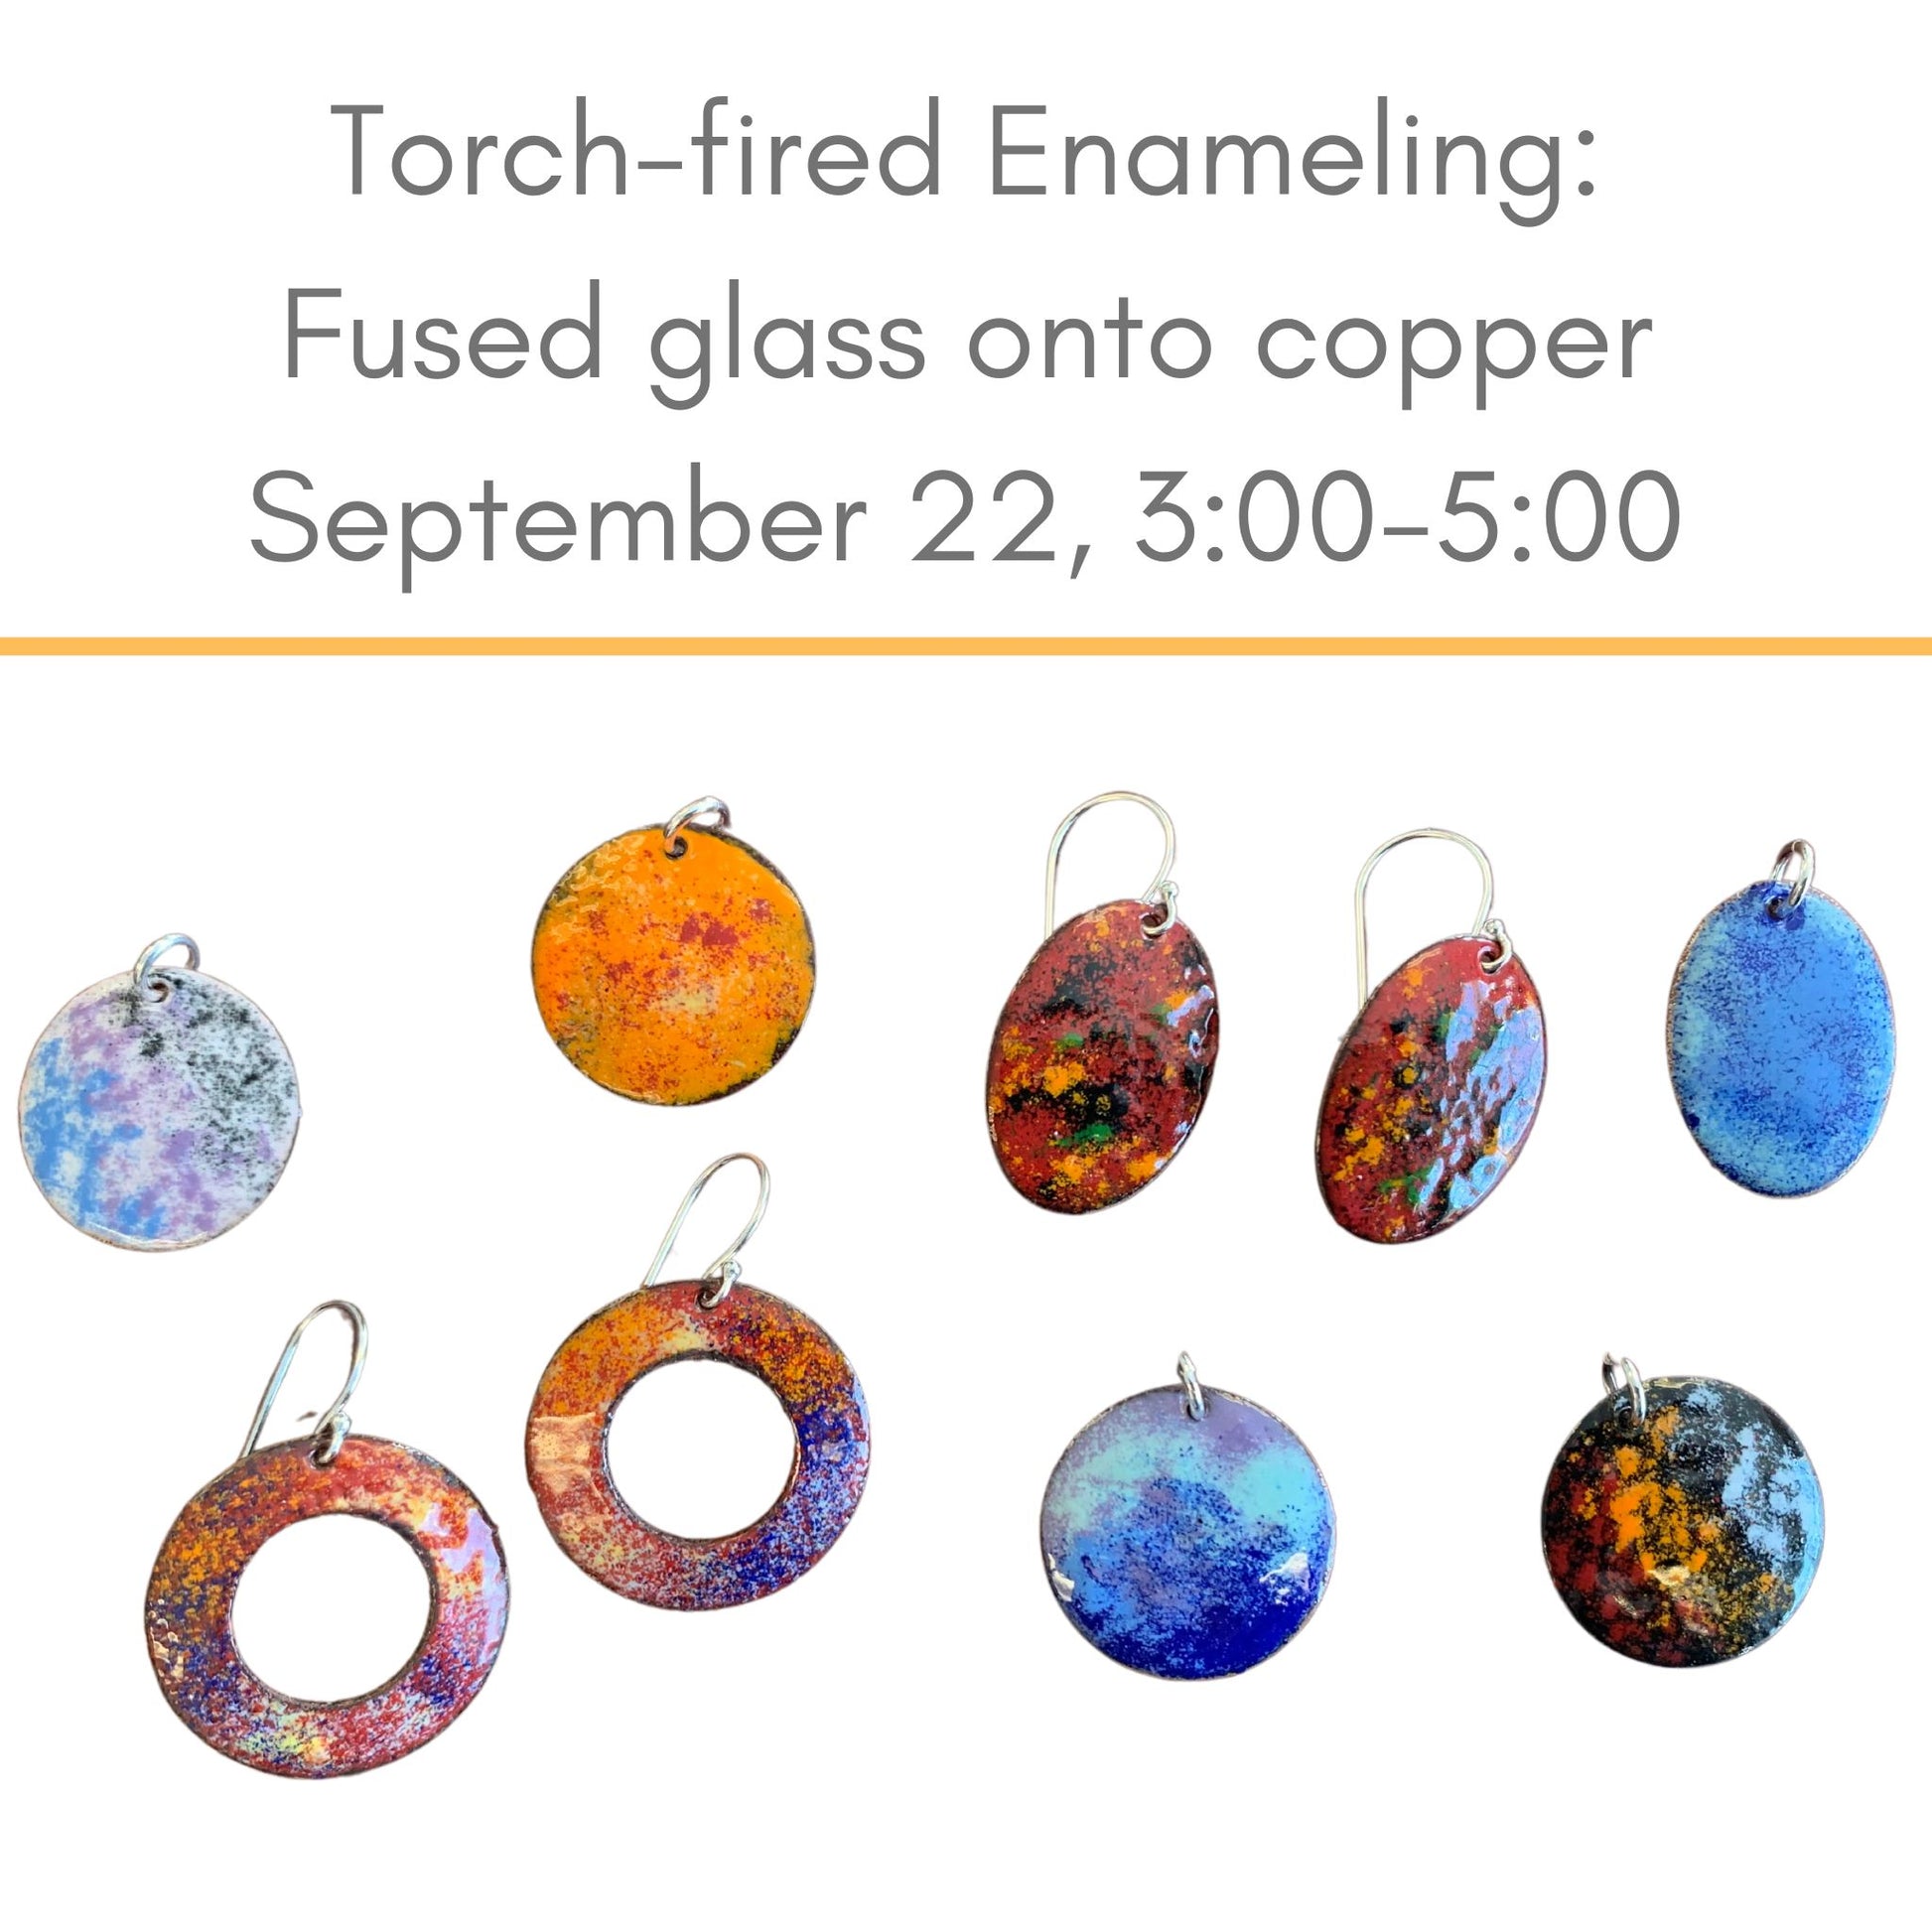 Torch Fired Enameling class September 22 at Silver Peak Studio